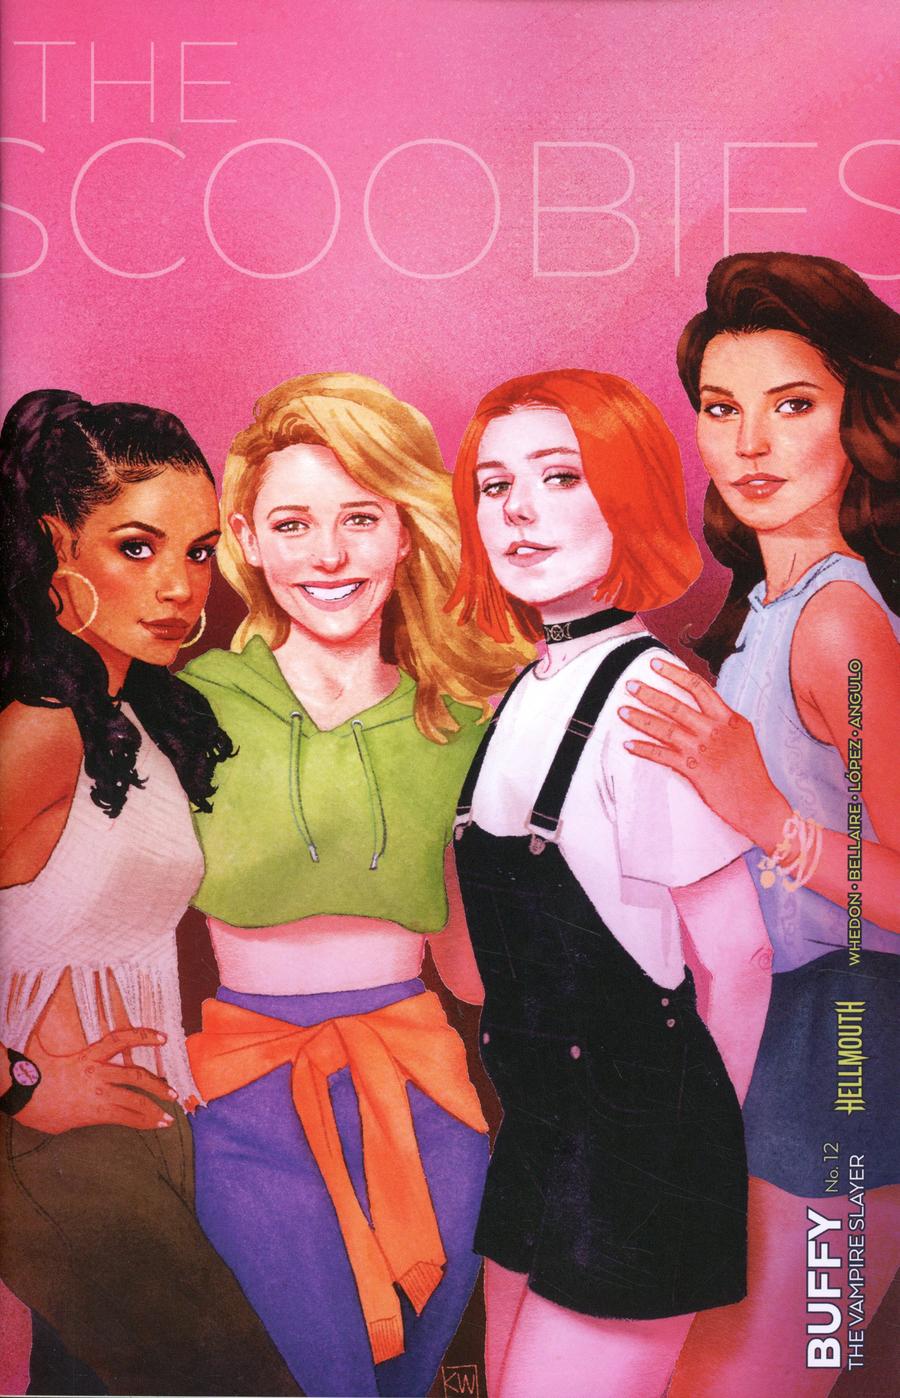 Buffy The Vampire Slayer Vol 2 #12 Cover B Variant Kevin Wada Cover (Hellmouth Tie-In)